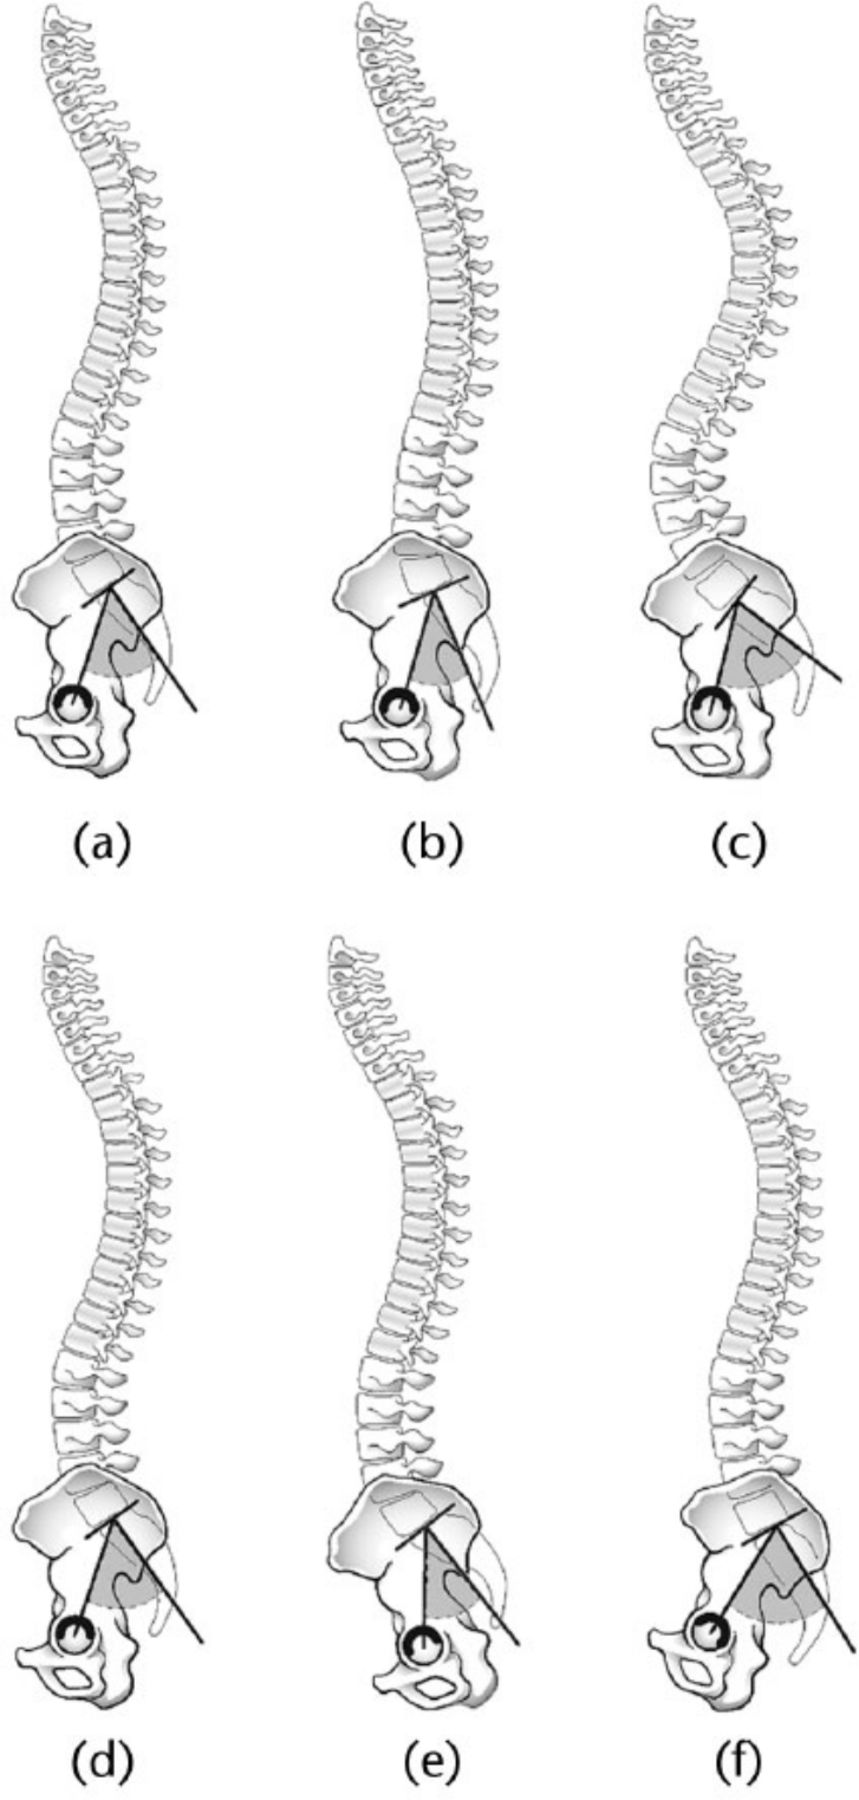 Fig. 5 
          Proposed kinematic mechanism for pelvic incidence influencing hip impingement. Top row: Pelvic orientation and lumbar lordosis corresponding to normal (a), low (b), and high (c) pelvic incidence. Bottom row: Proposed compensatory pelvic tilt in order to maintain appropriate sagittal balance and normalise lumbar lordosis. The pelvis with normal pelvic incidence (d) is static. The pelvises with low (e) and high (f) pelvic incidence normalise their lumbar lordosis through anterior and posterior pelvic tilt, respectively.
        